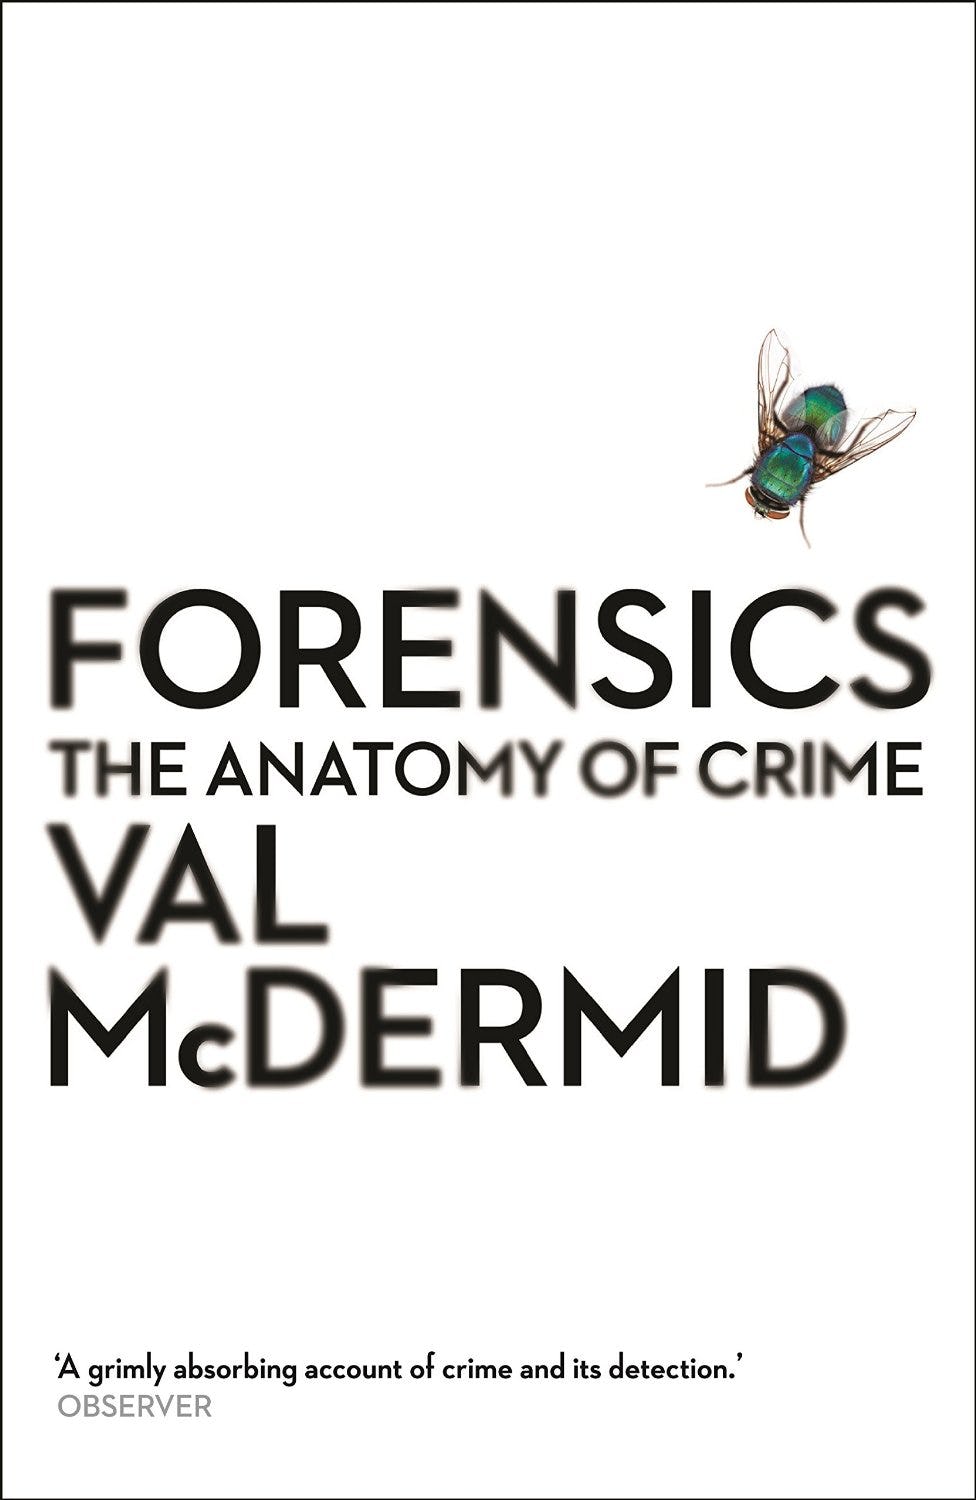 Book cover of Forensics by Val McDermid